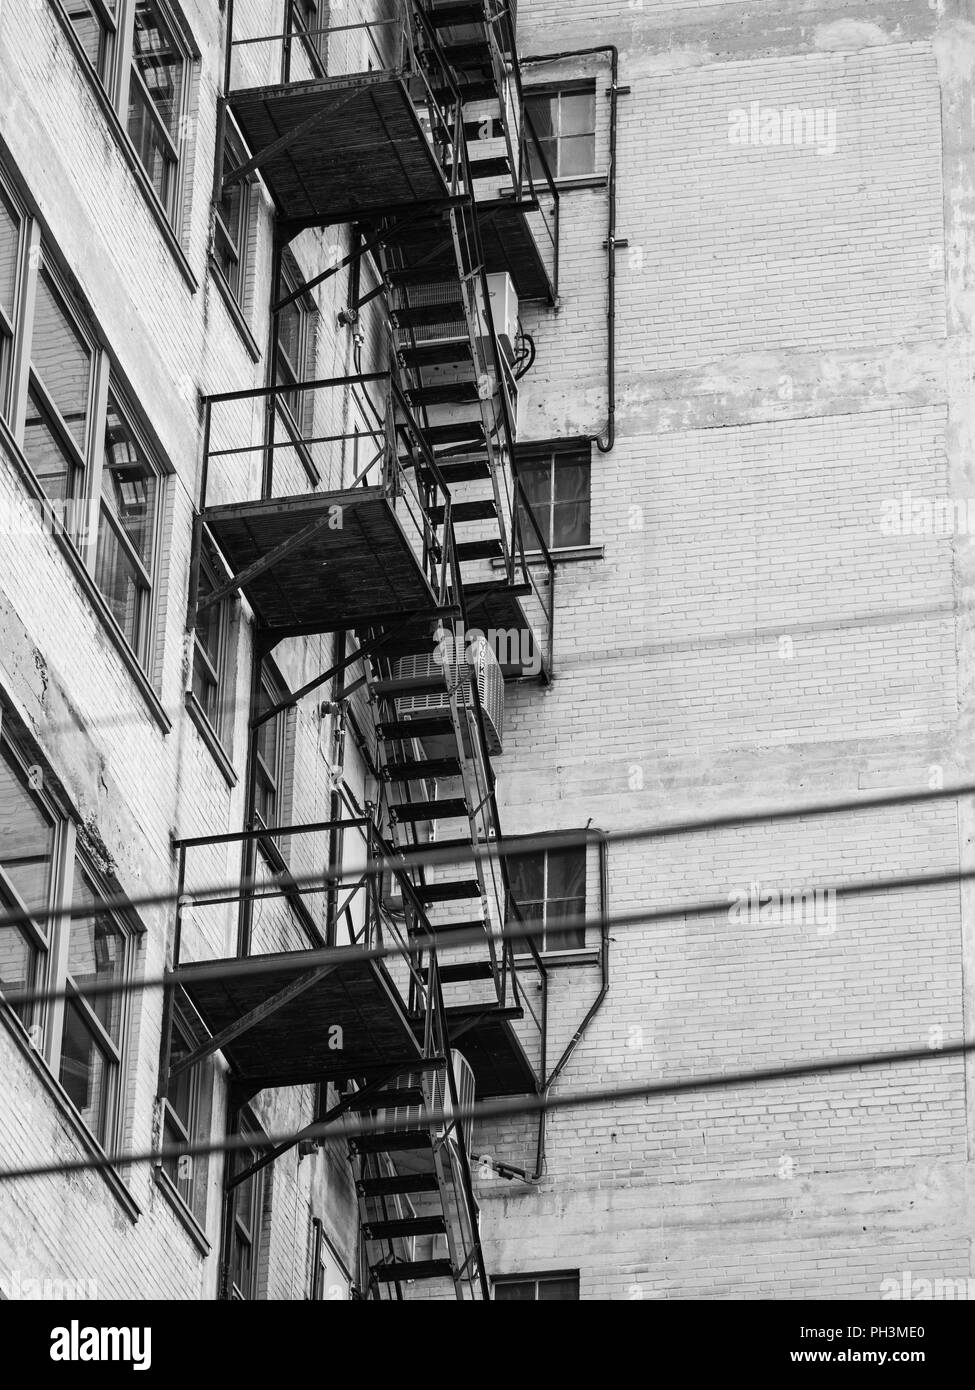 emergency stairs on the back of a building Stock Photo